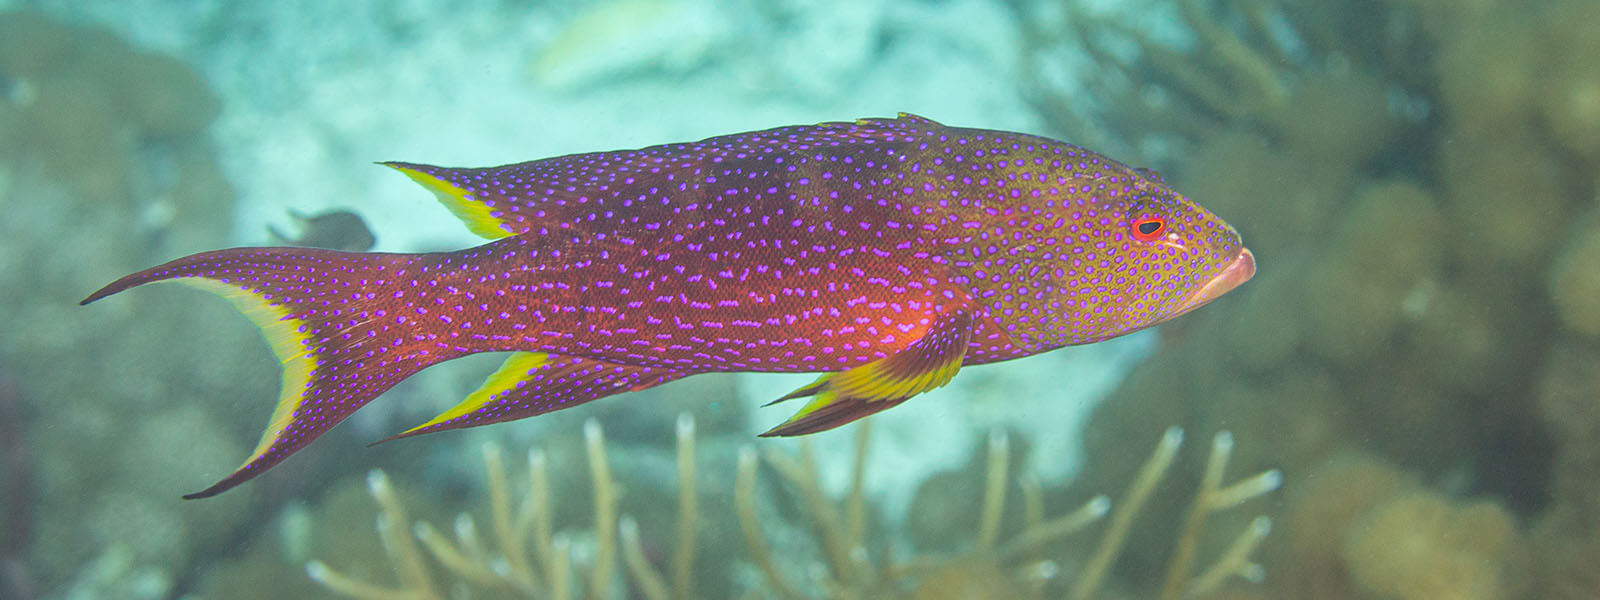 Lyretail groupers are colorful examples of some of the fish found in Indonesia